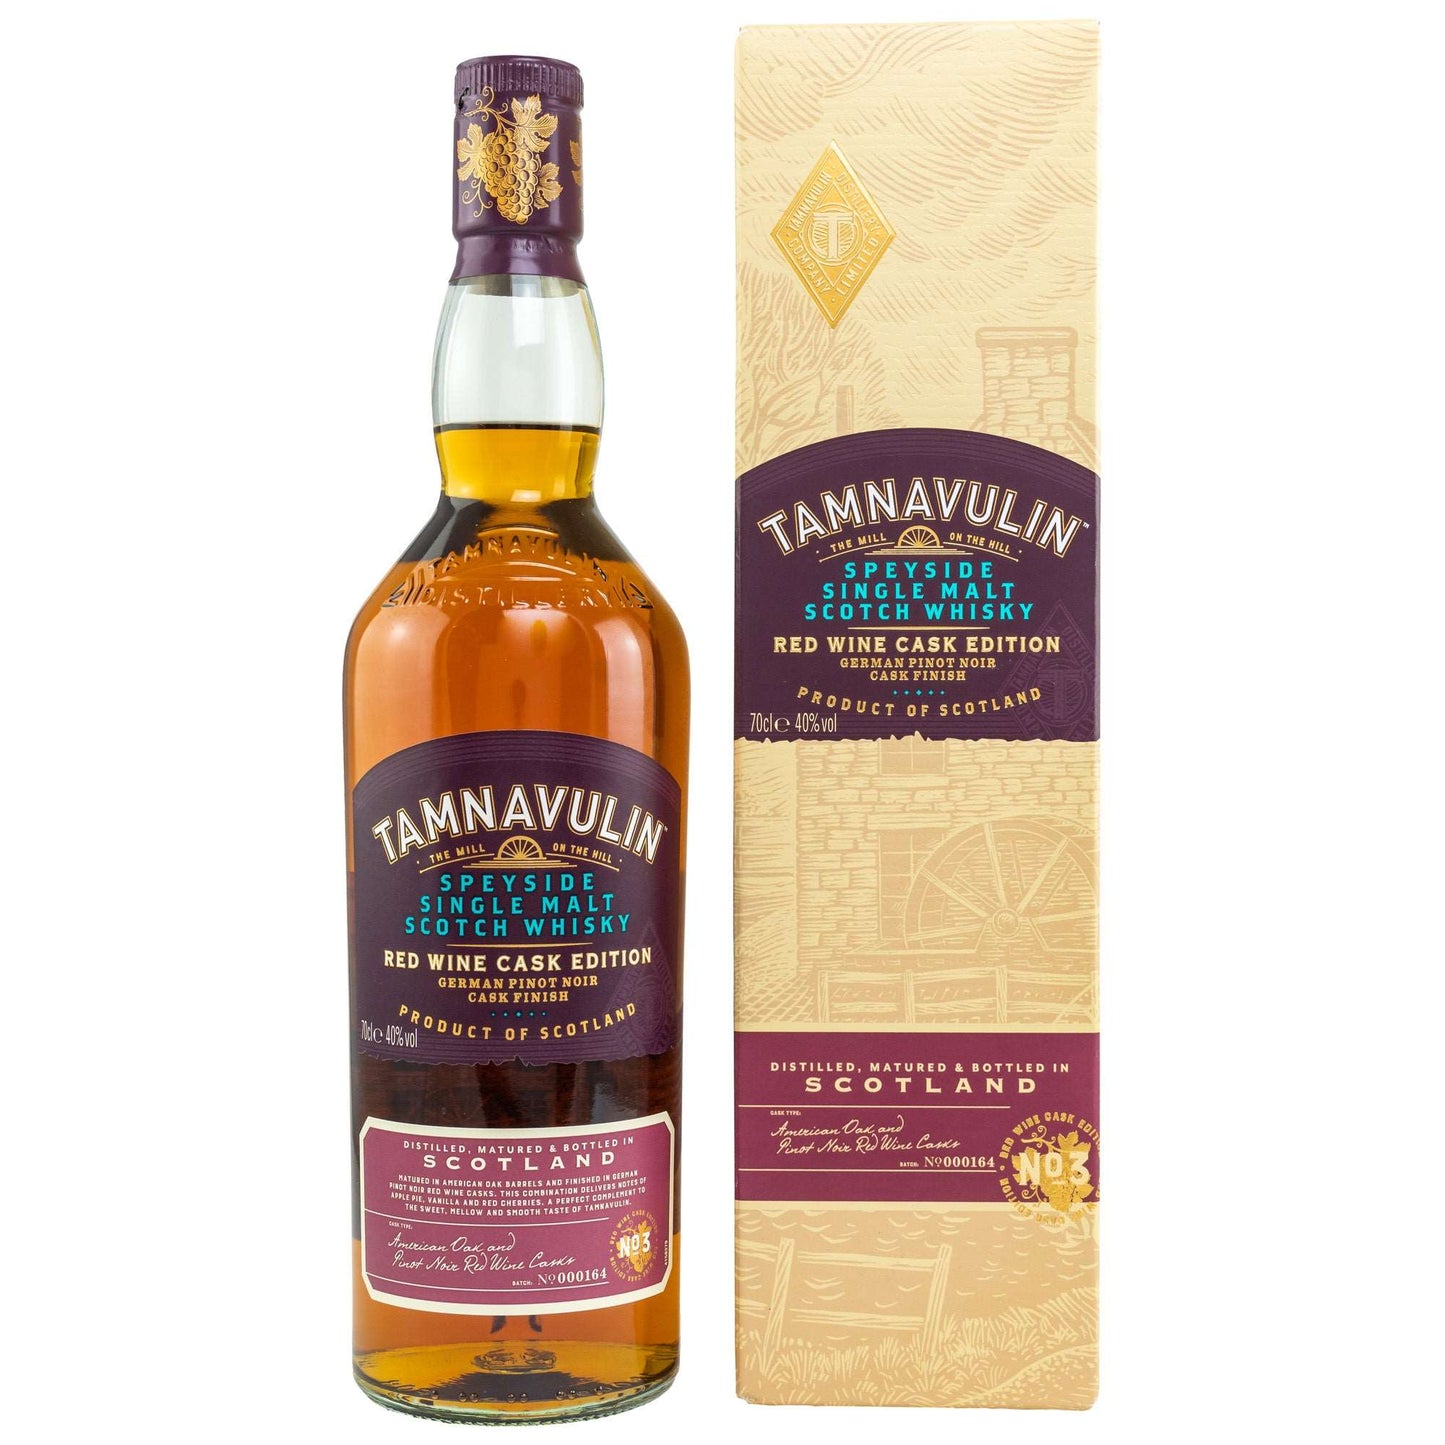 Tamnavulin | Red Wine Cask Edition No.3 | 0,7l | 40%GET A BOTTLE